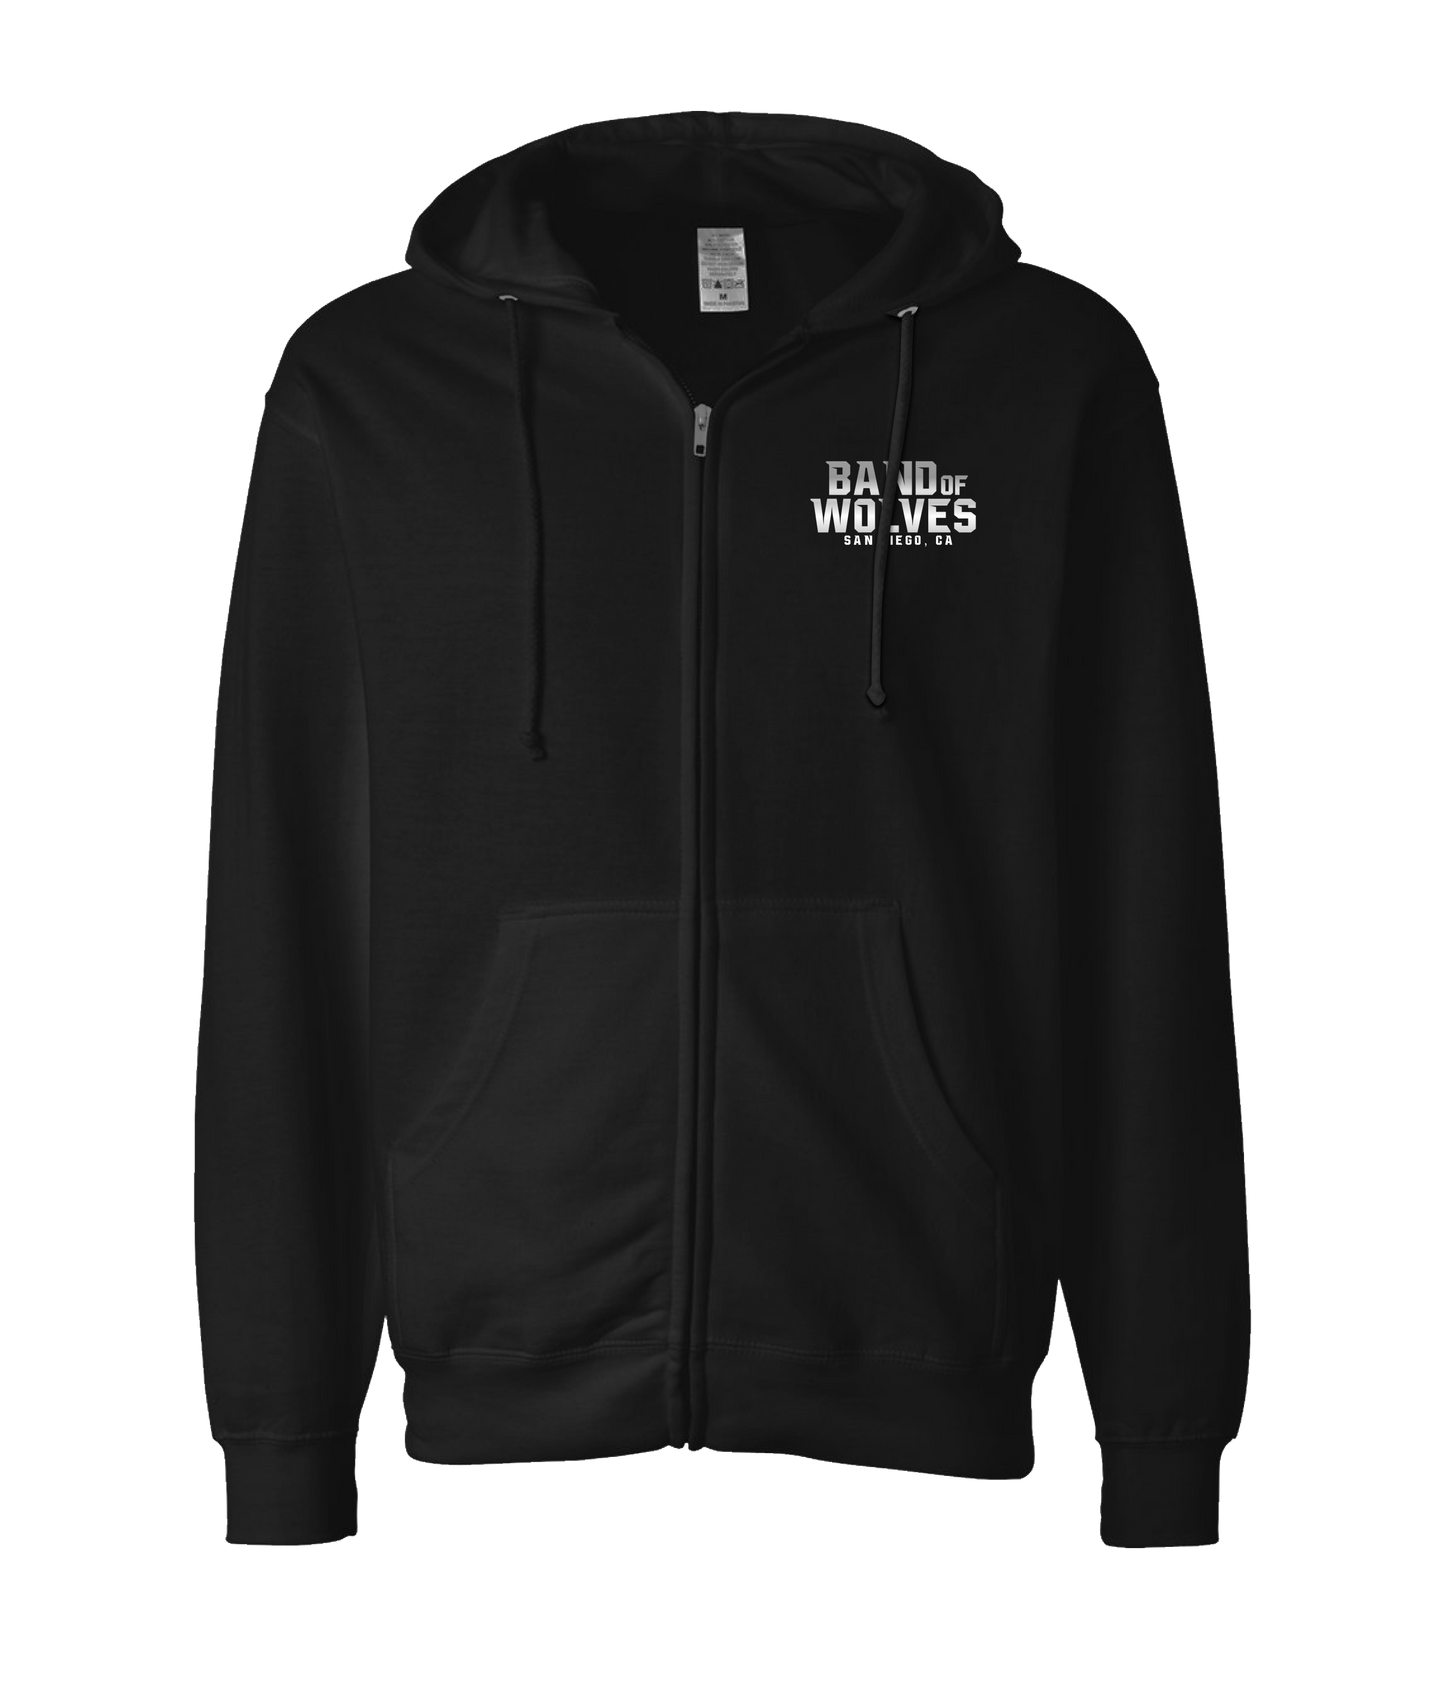 Band of Wolves - Howlin' At The Moon - Black Zip Up Hoodie